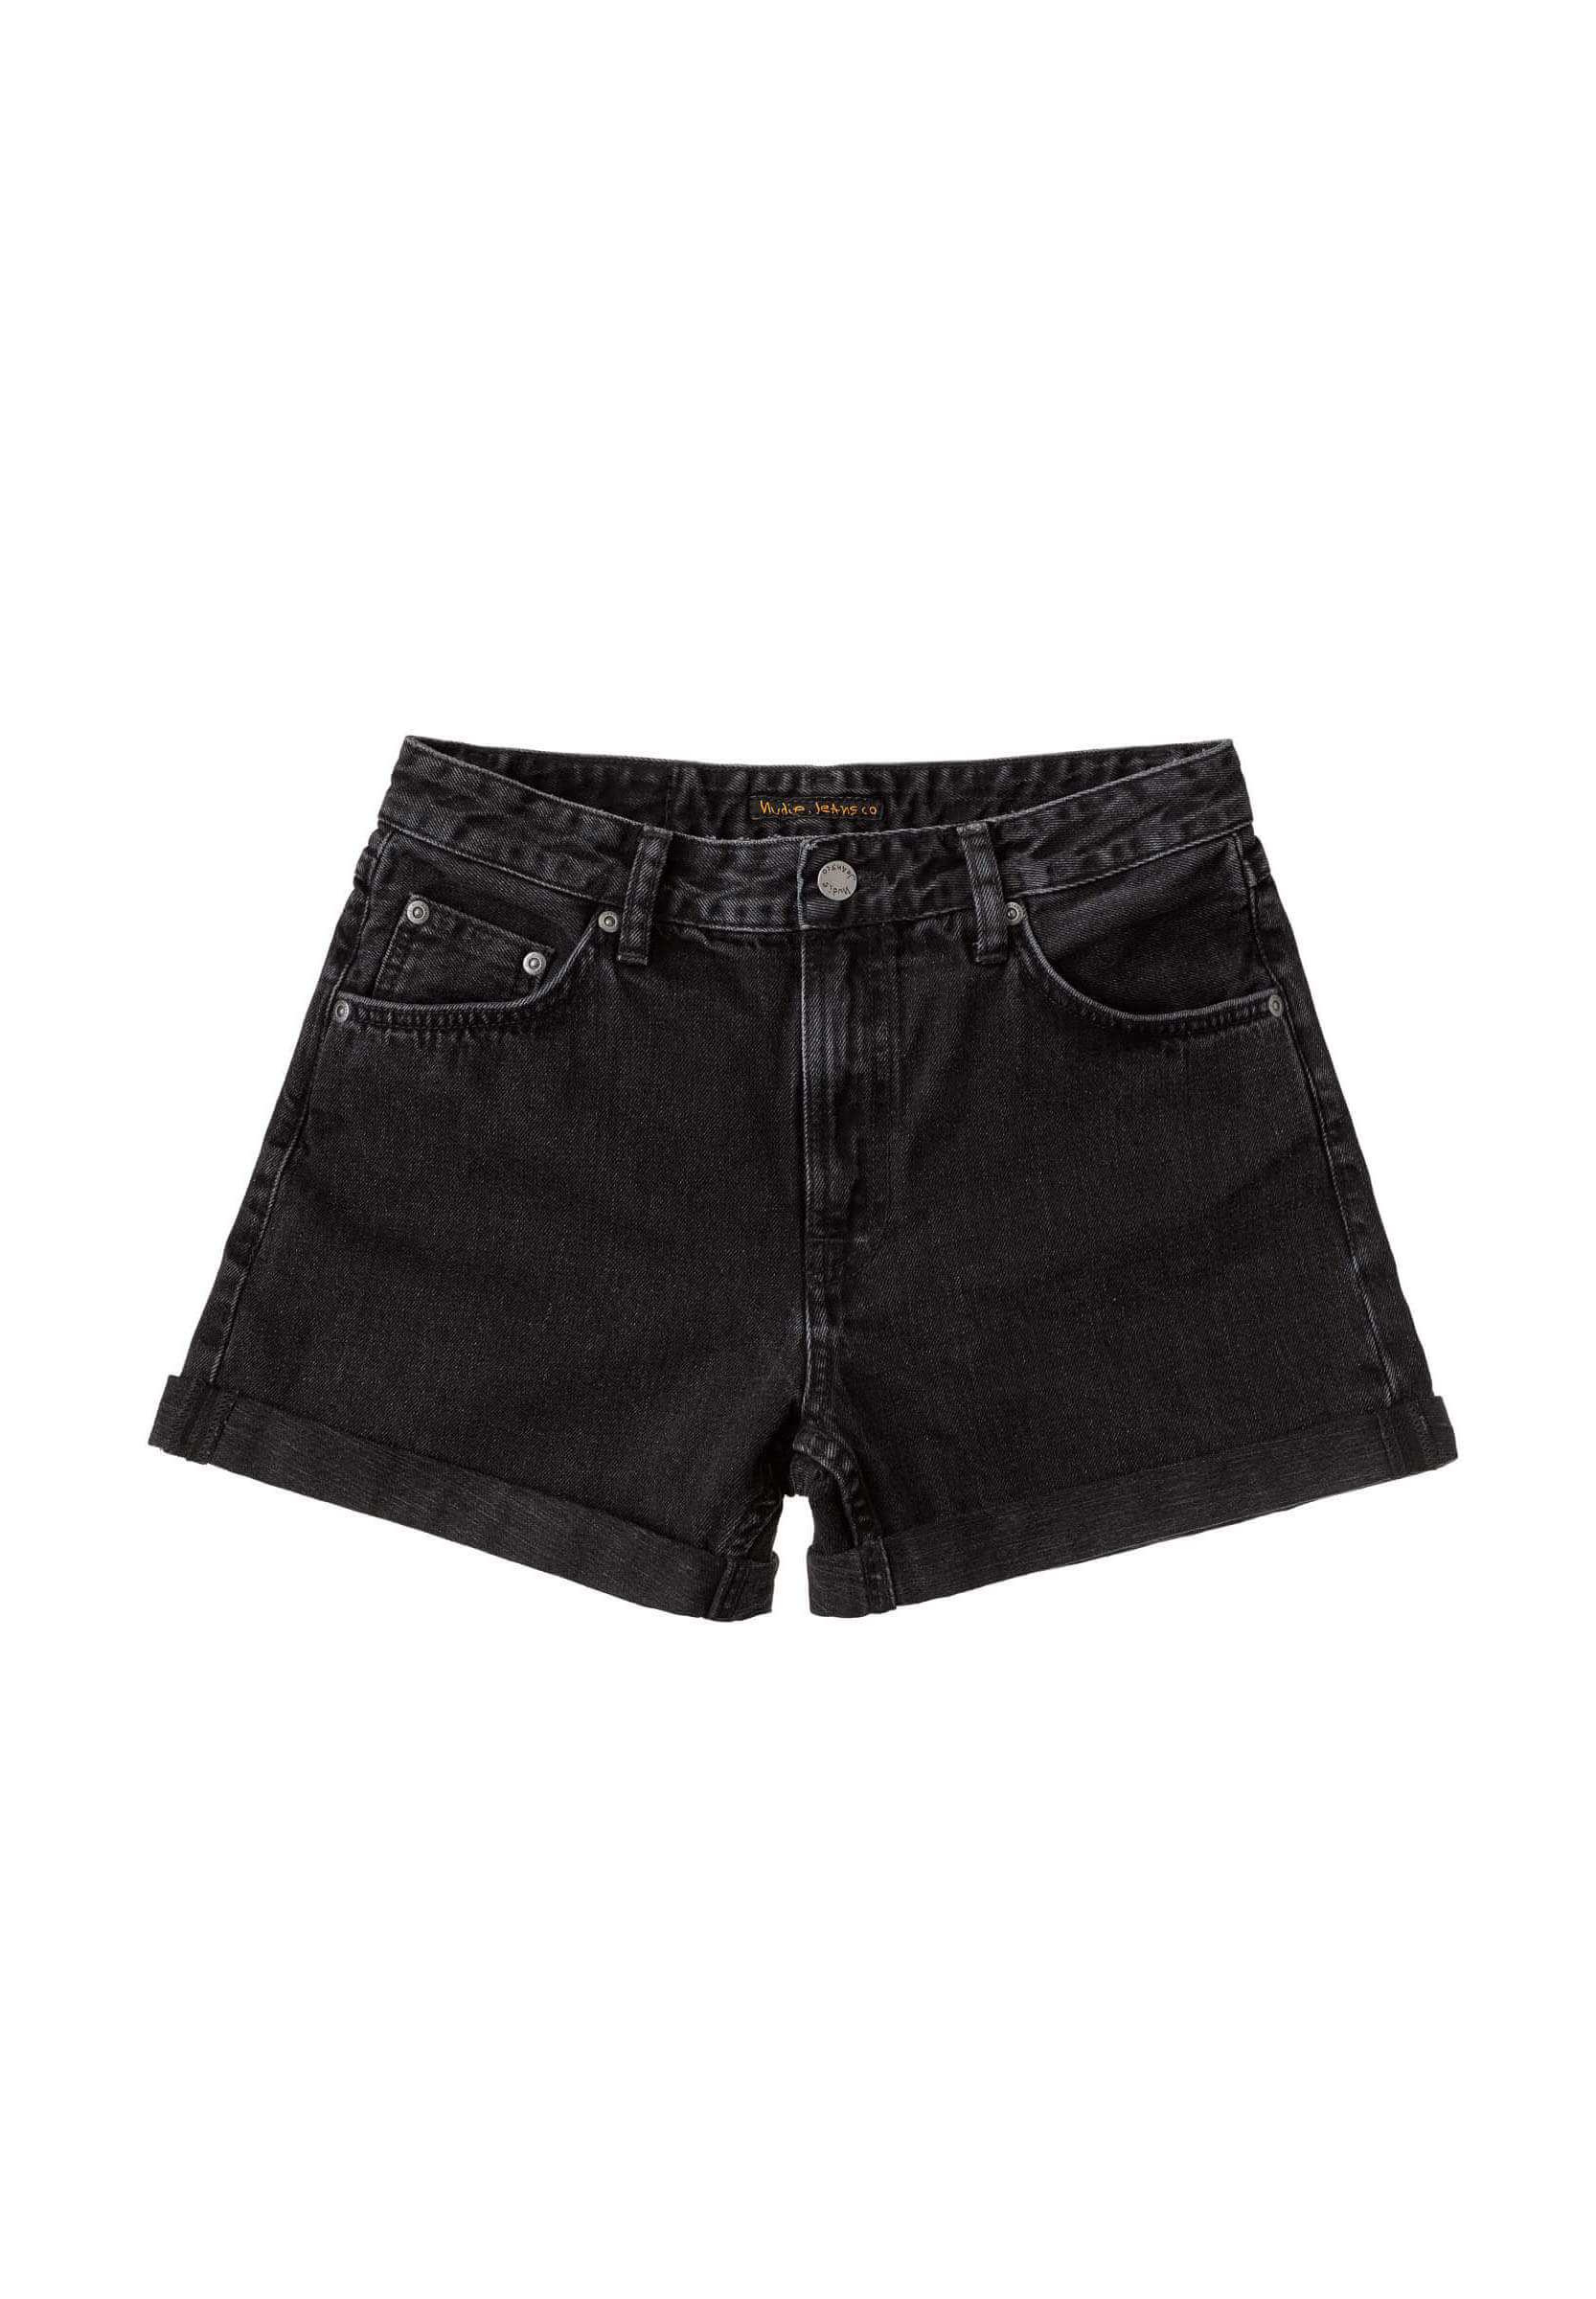 NUDIE JEANS Shorts black trace 26